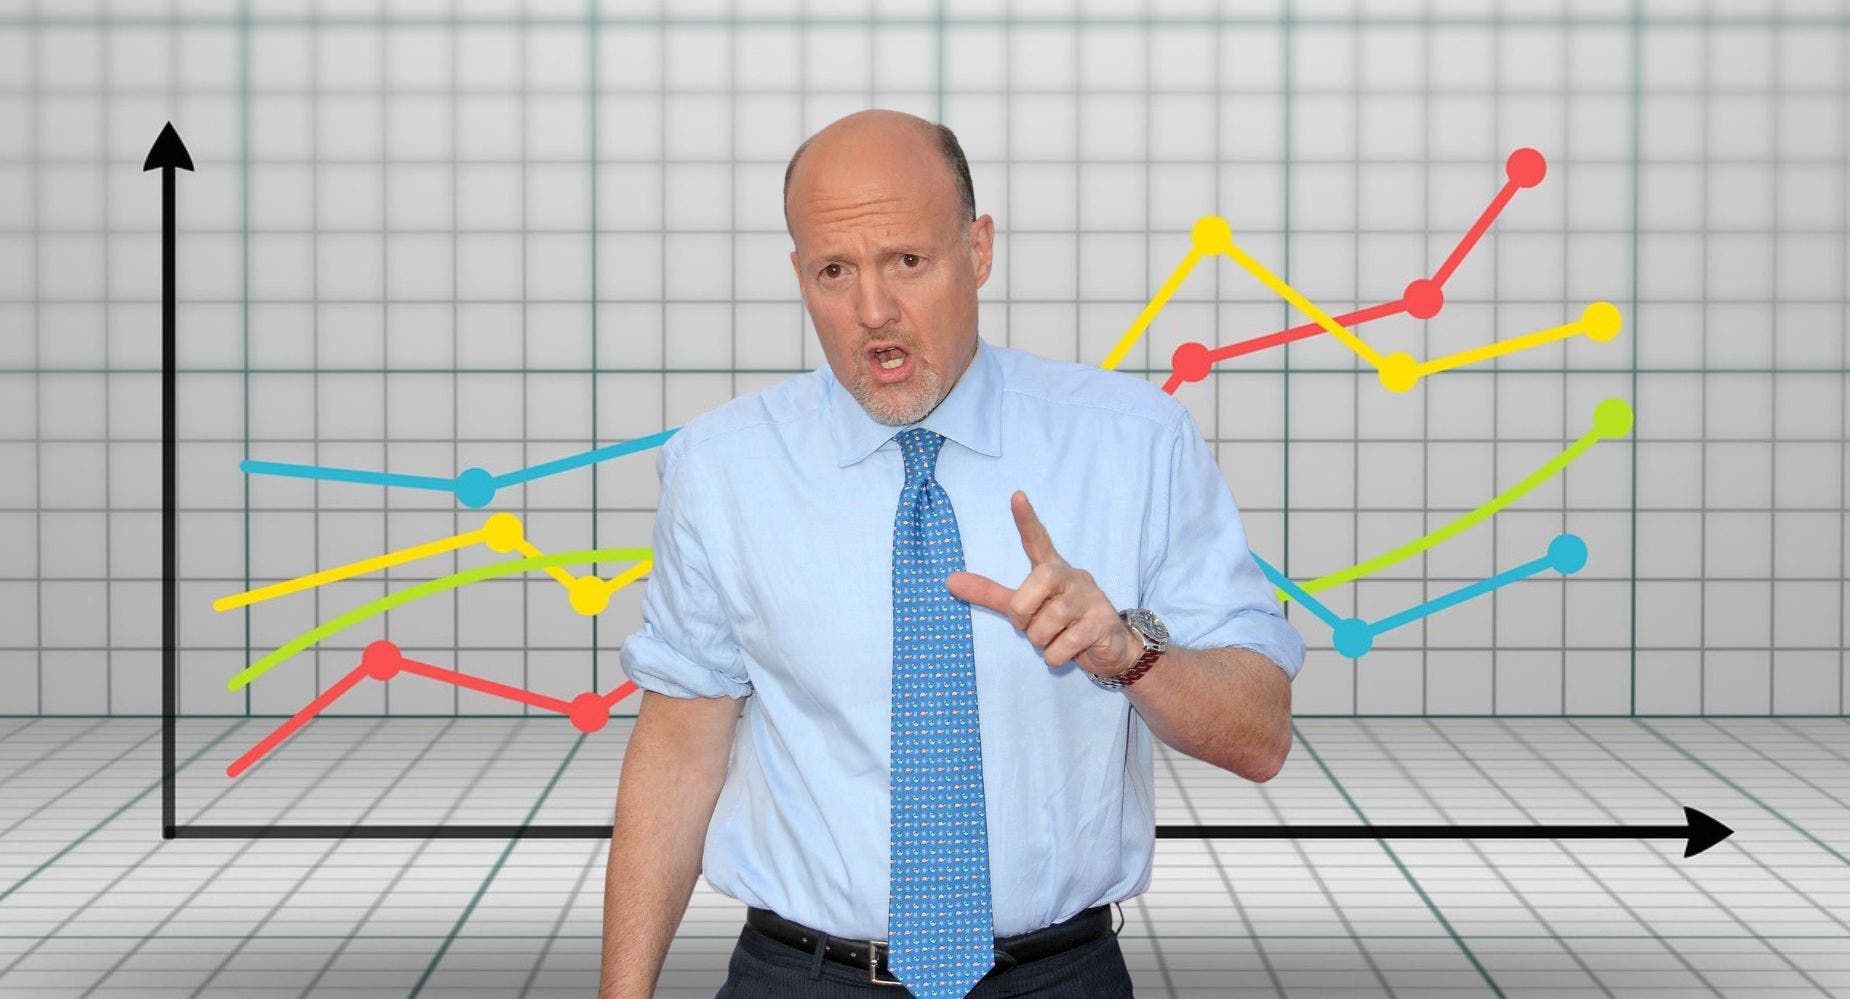 Jim Cramer Says This Stock Up 23% In A Month Is 'A Great Speculative Buy'